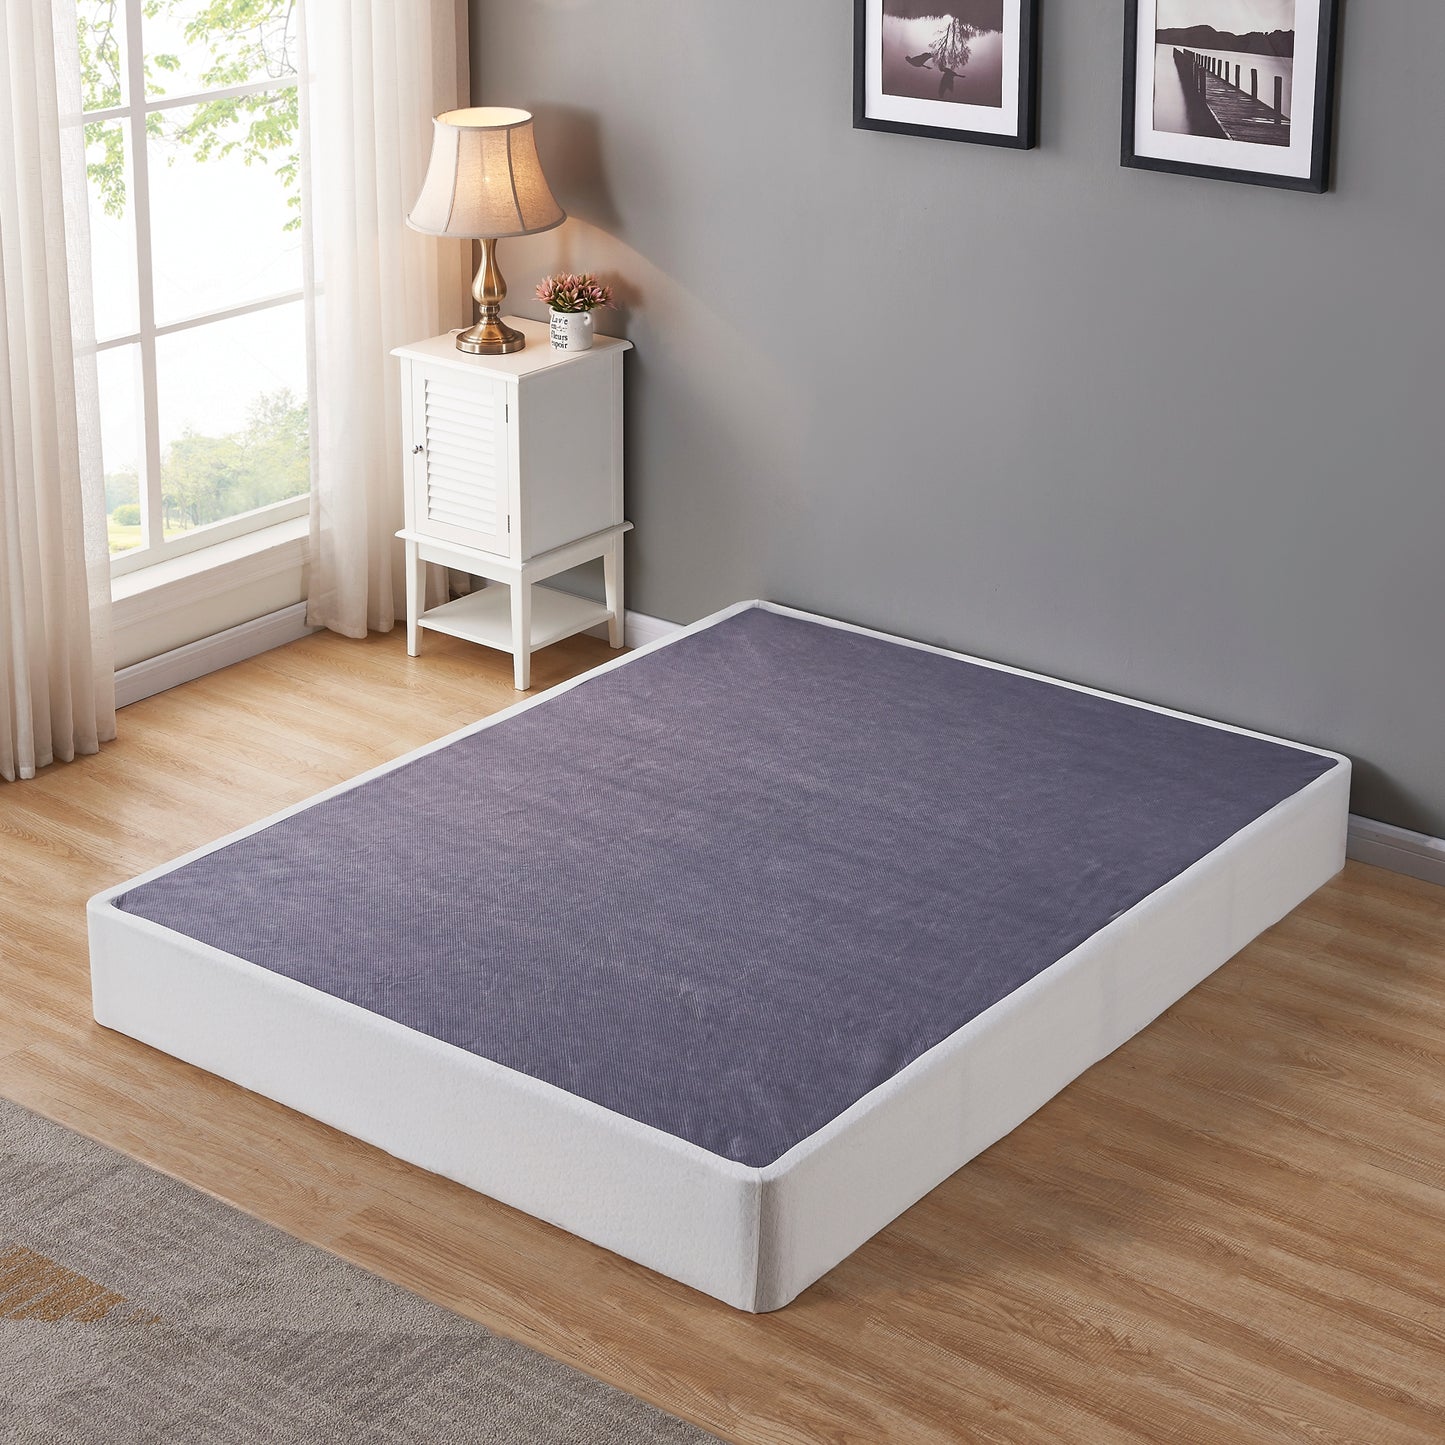 Limited Edition Pillowtop Mattress with Foundation